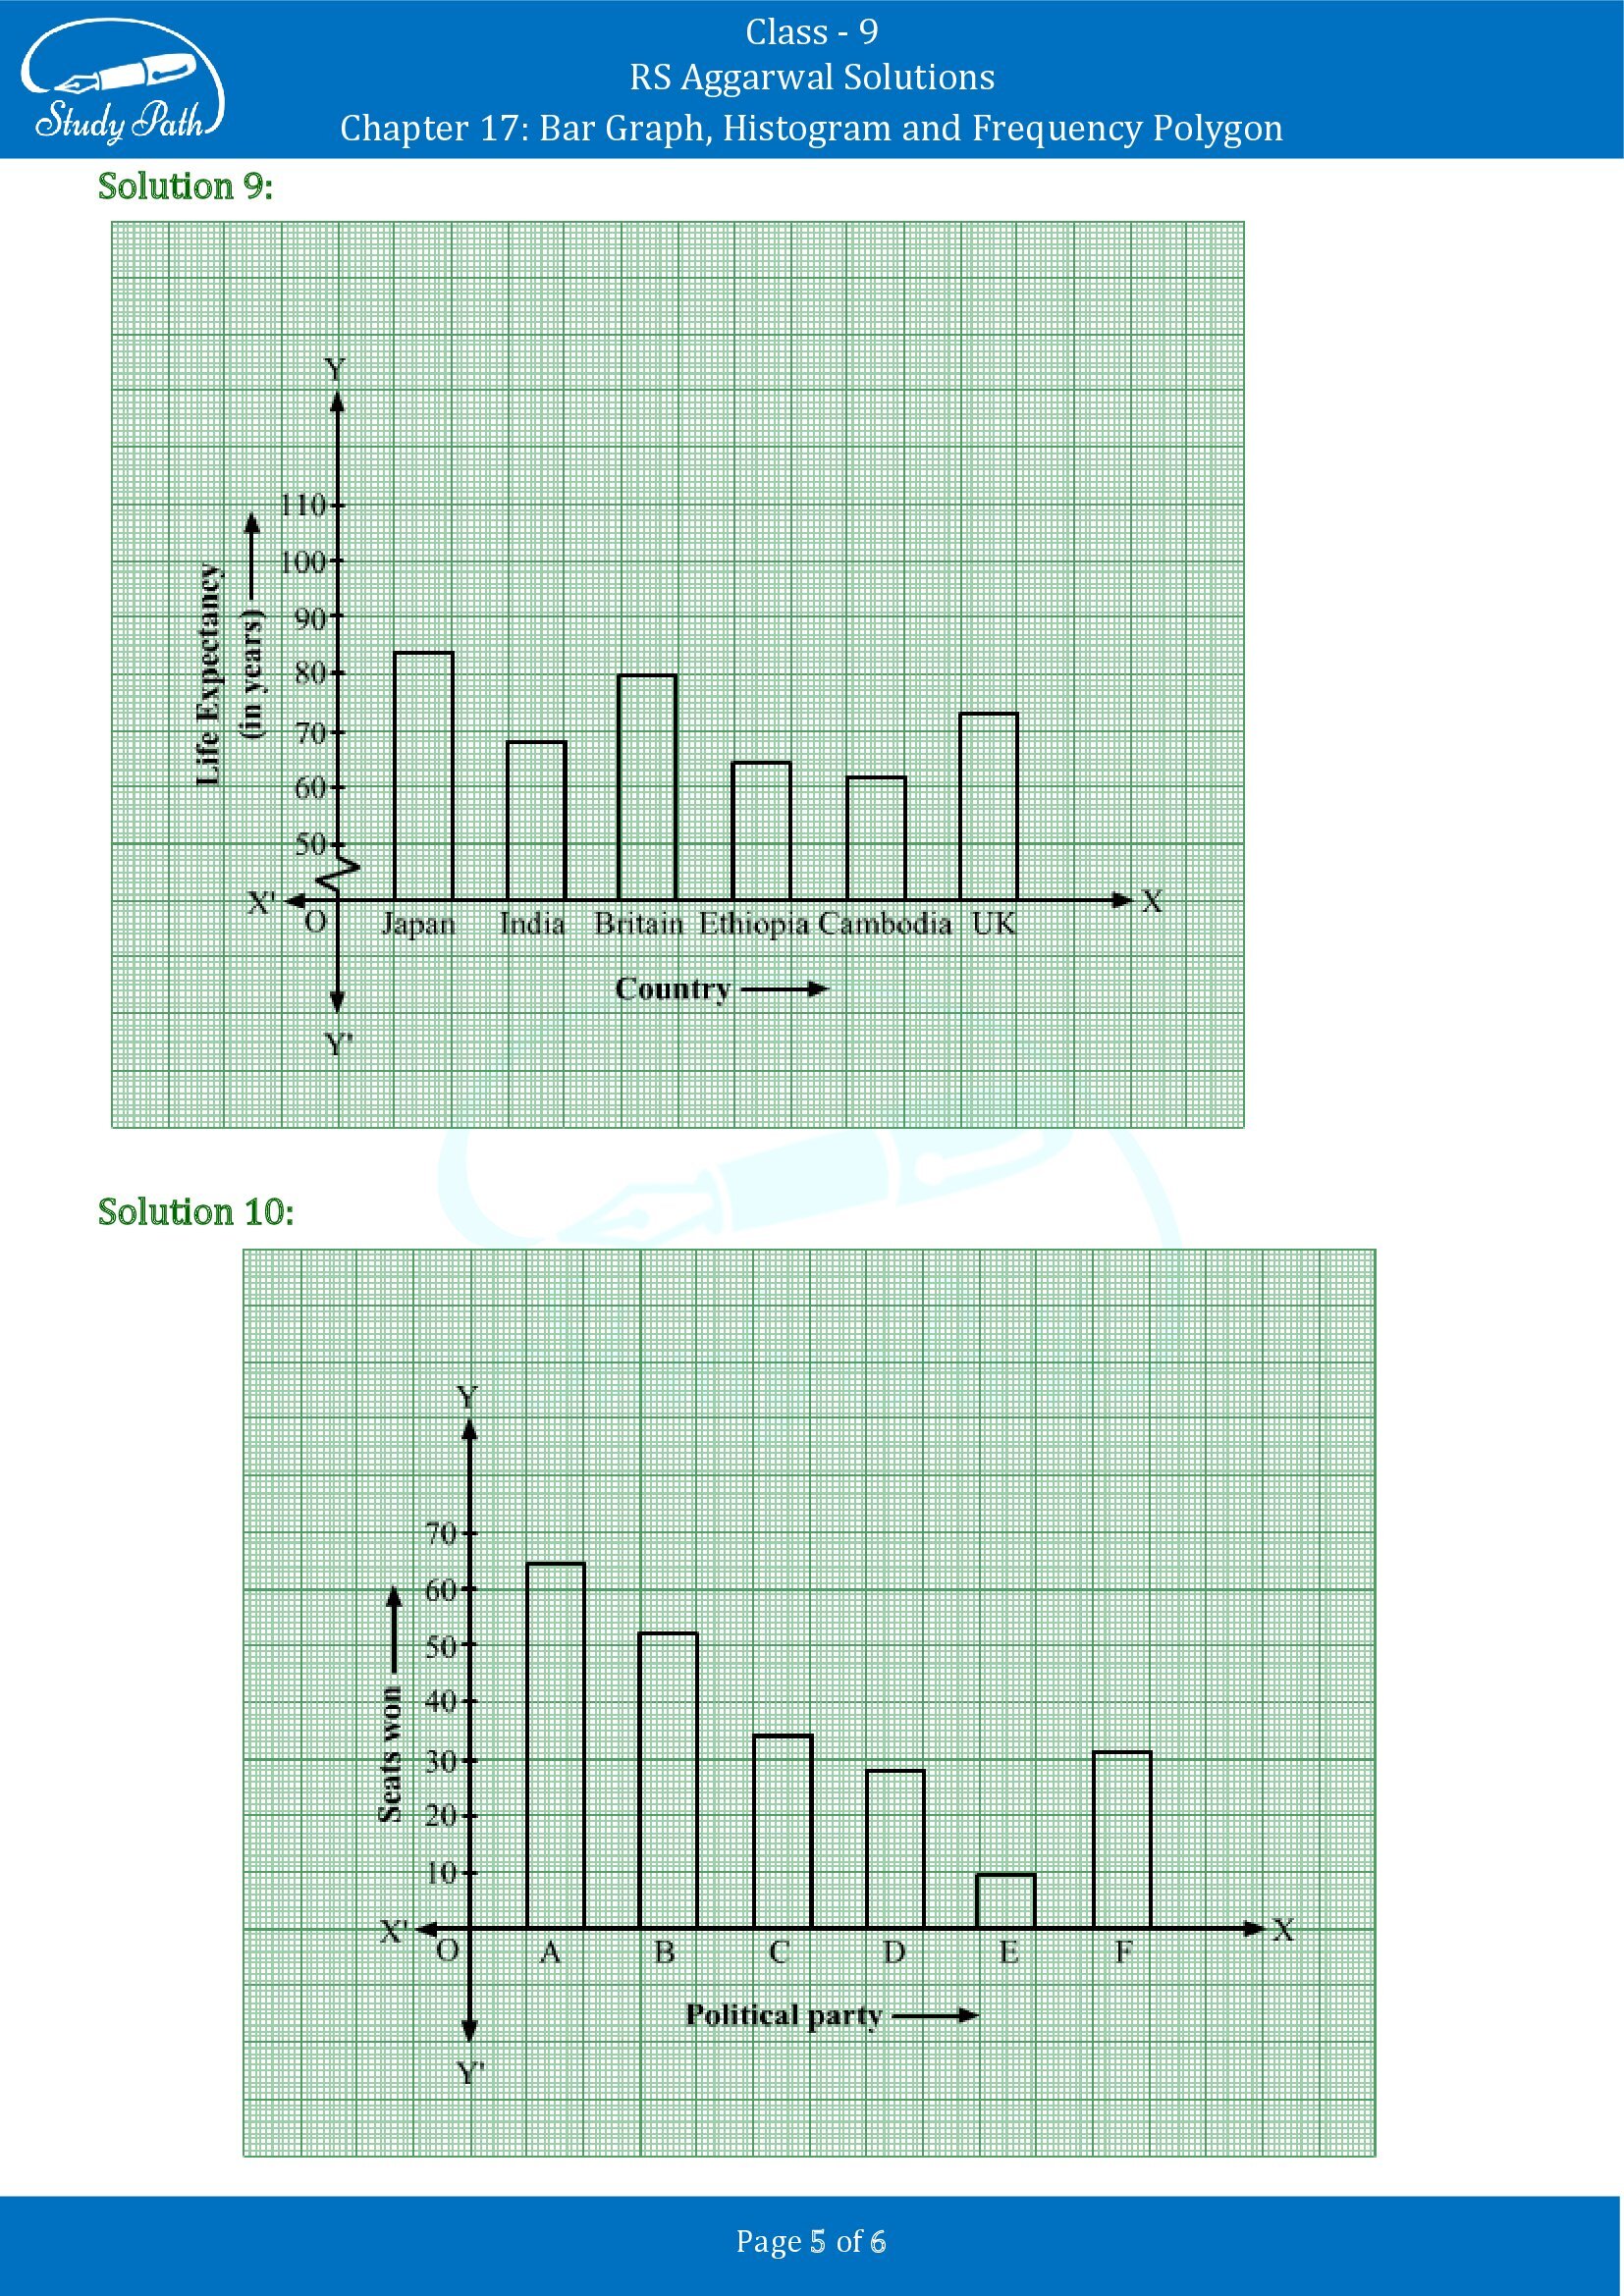 RS Aggarwal Solutions Class 9 Chapter 17 Bar Graph Histogram and Frequency Polygon Exercise 17A 00005